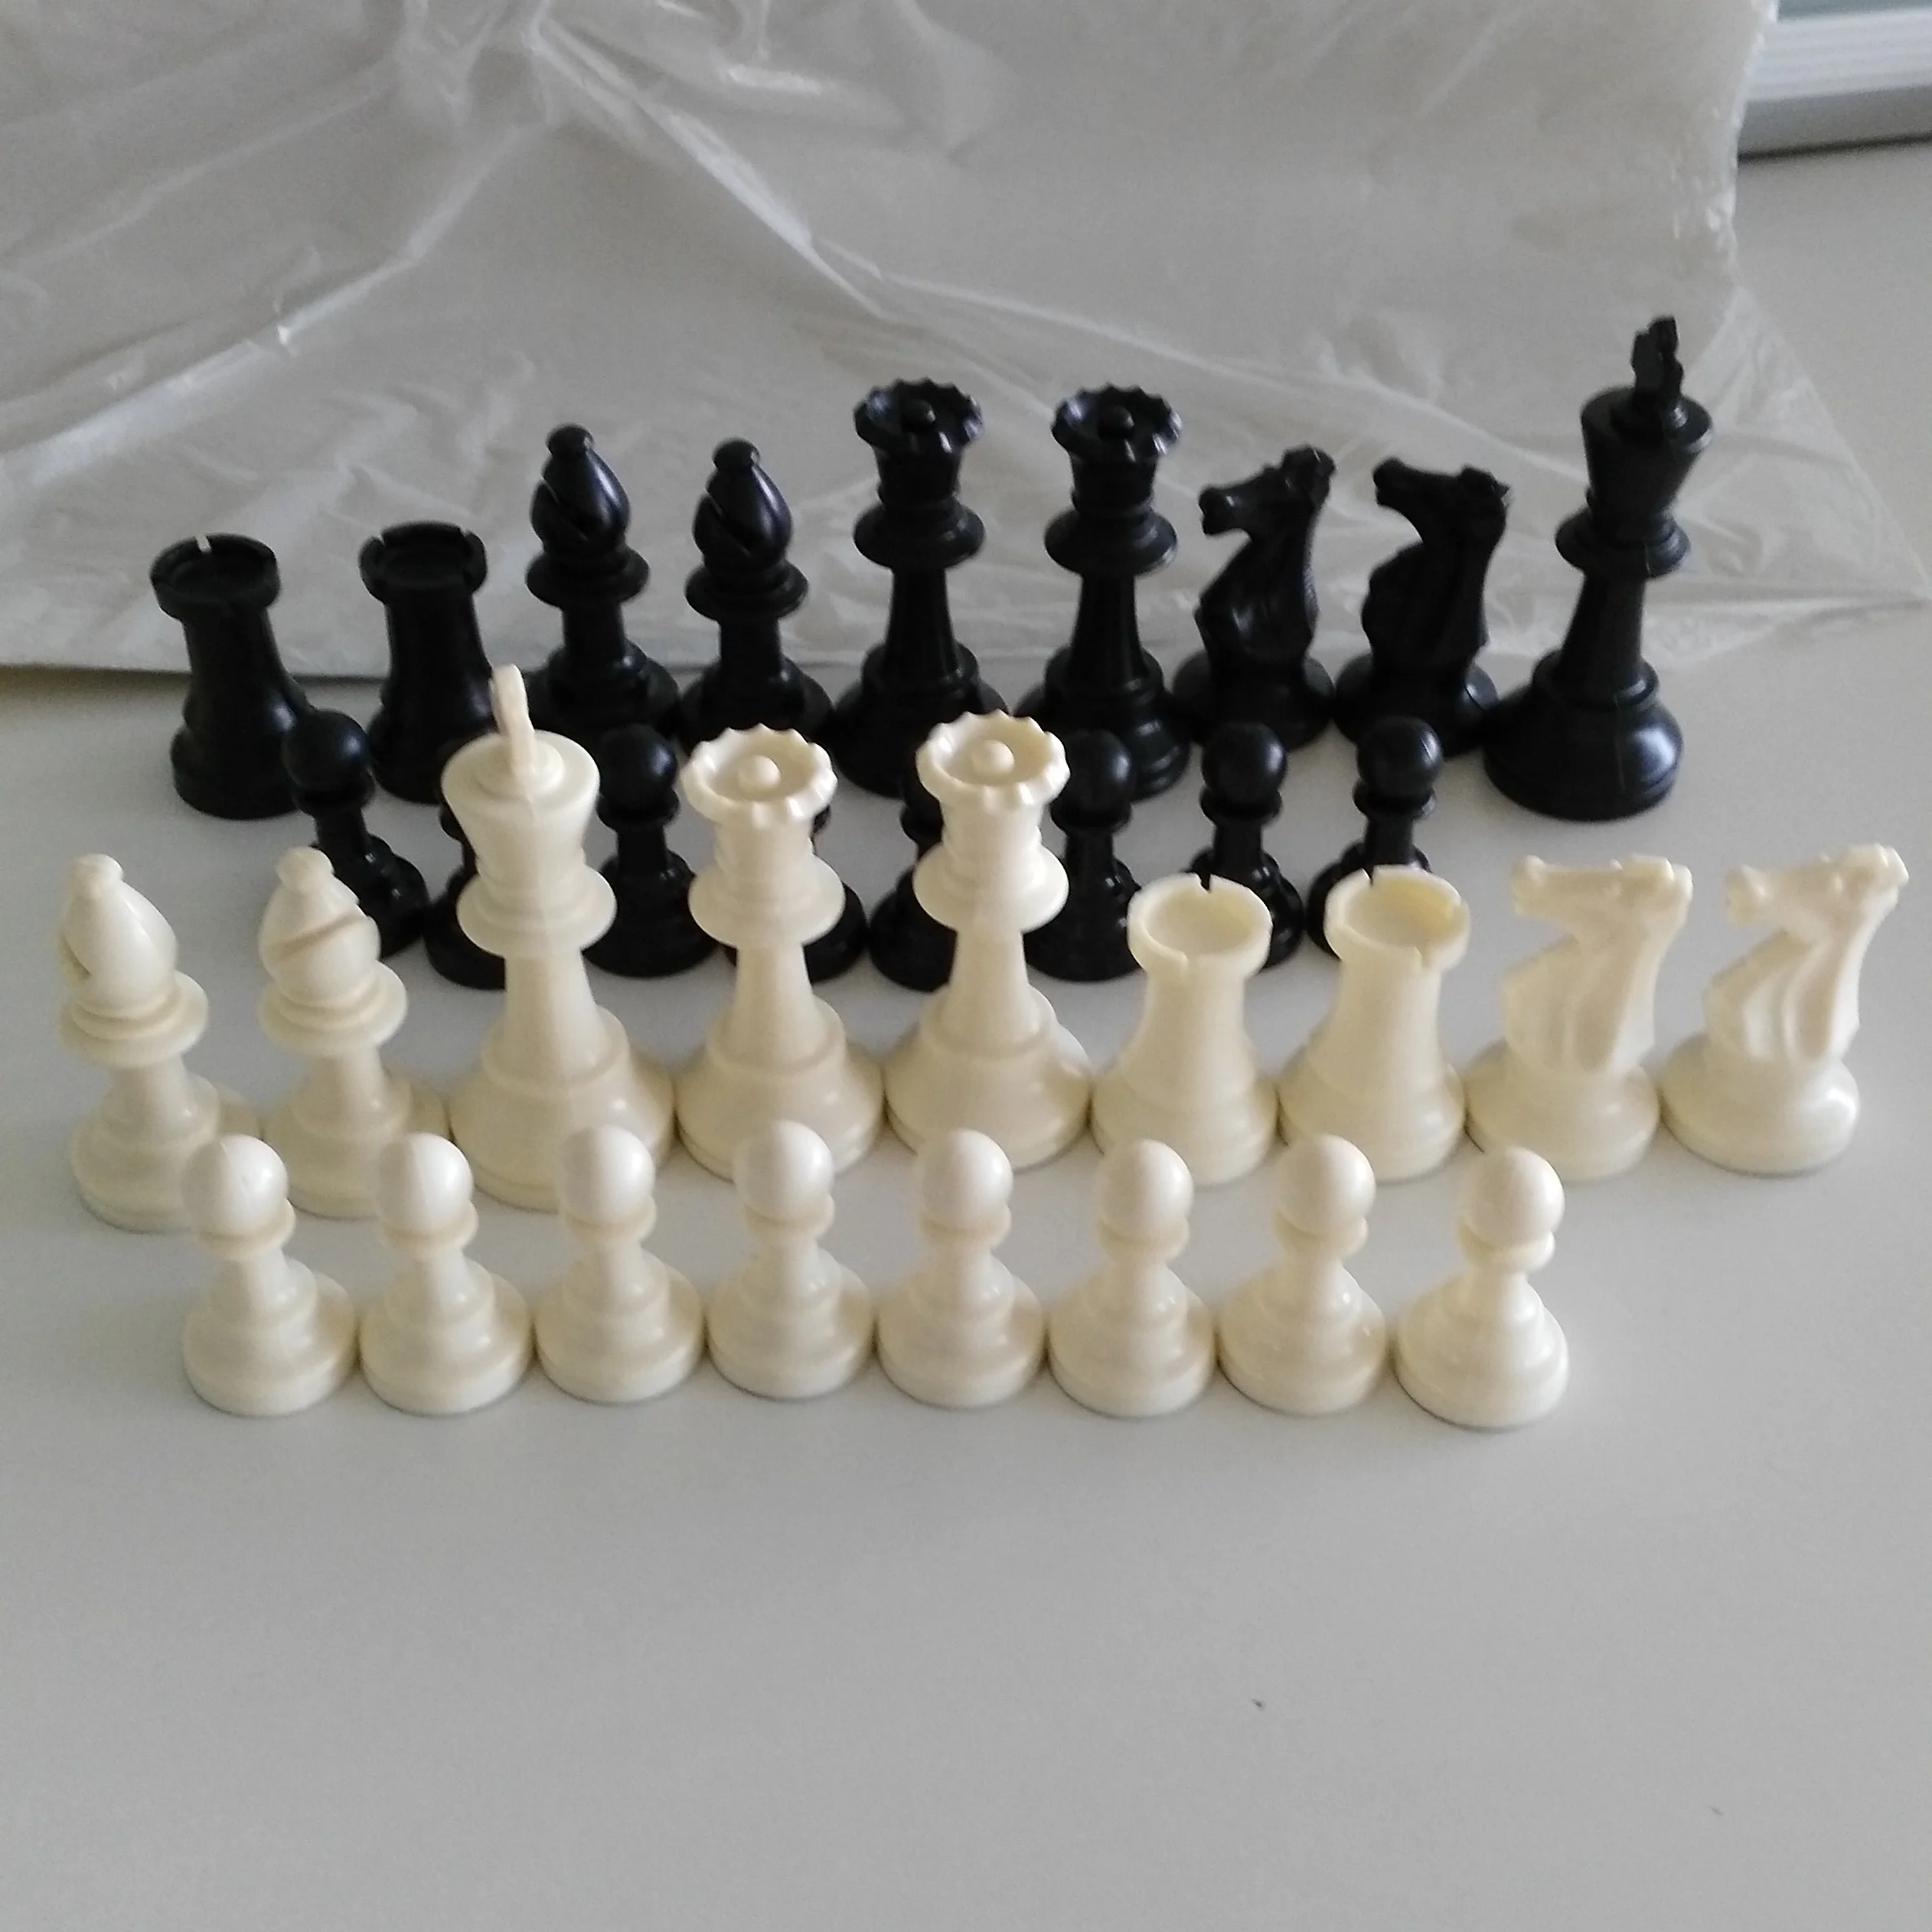 

Tournament standard club chess piece High quality king height 3.75 inches plastic chess pieces with extra queen 34pcs per set, Black and white